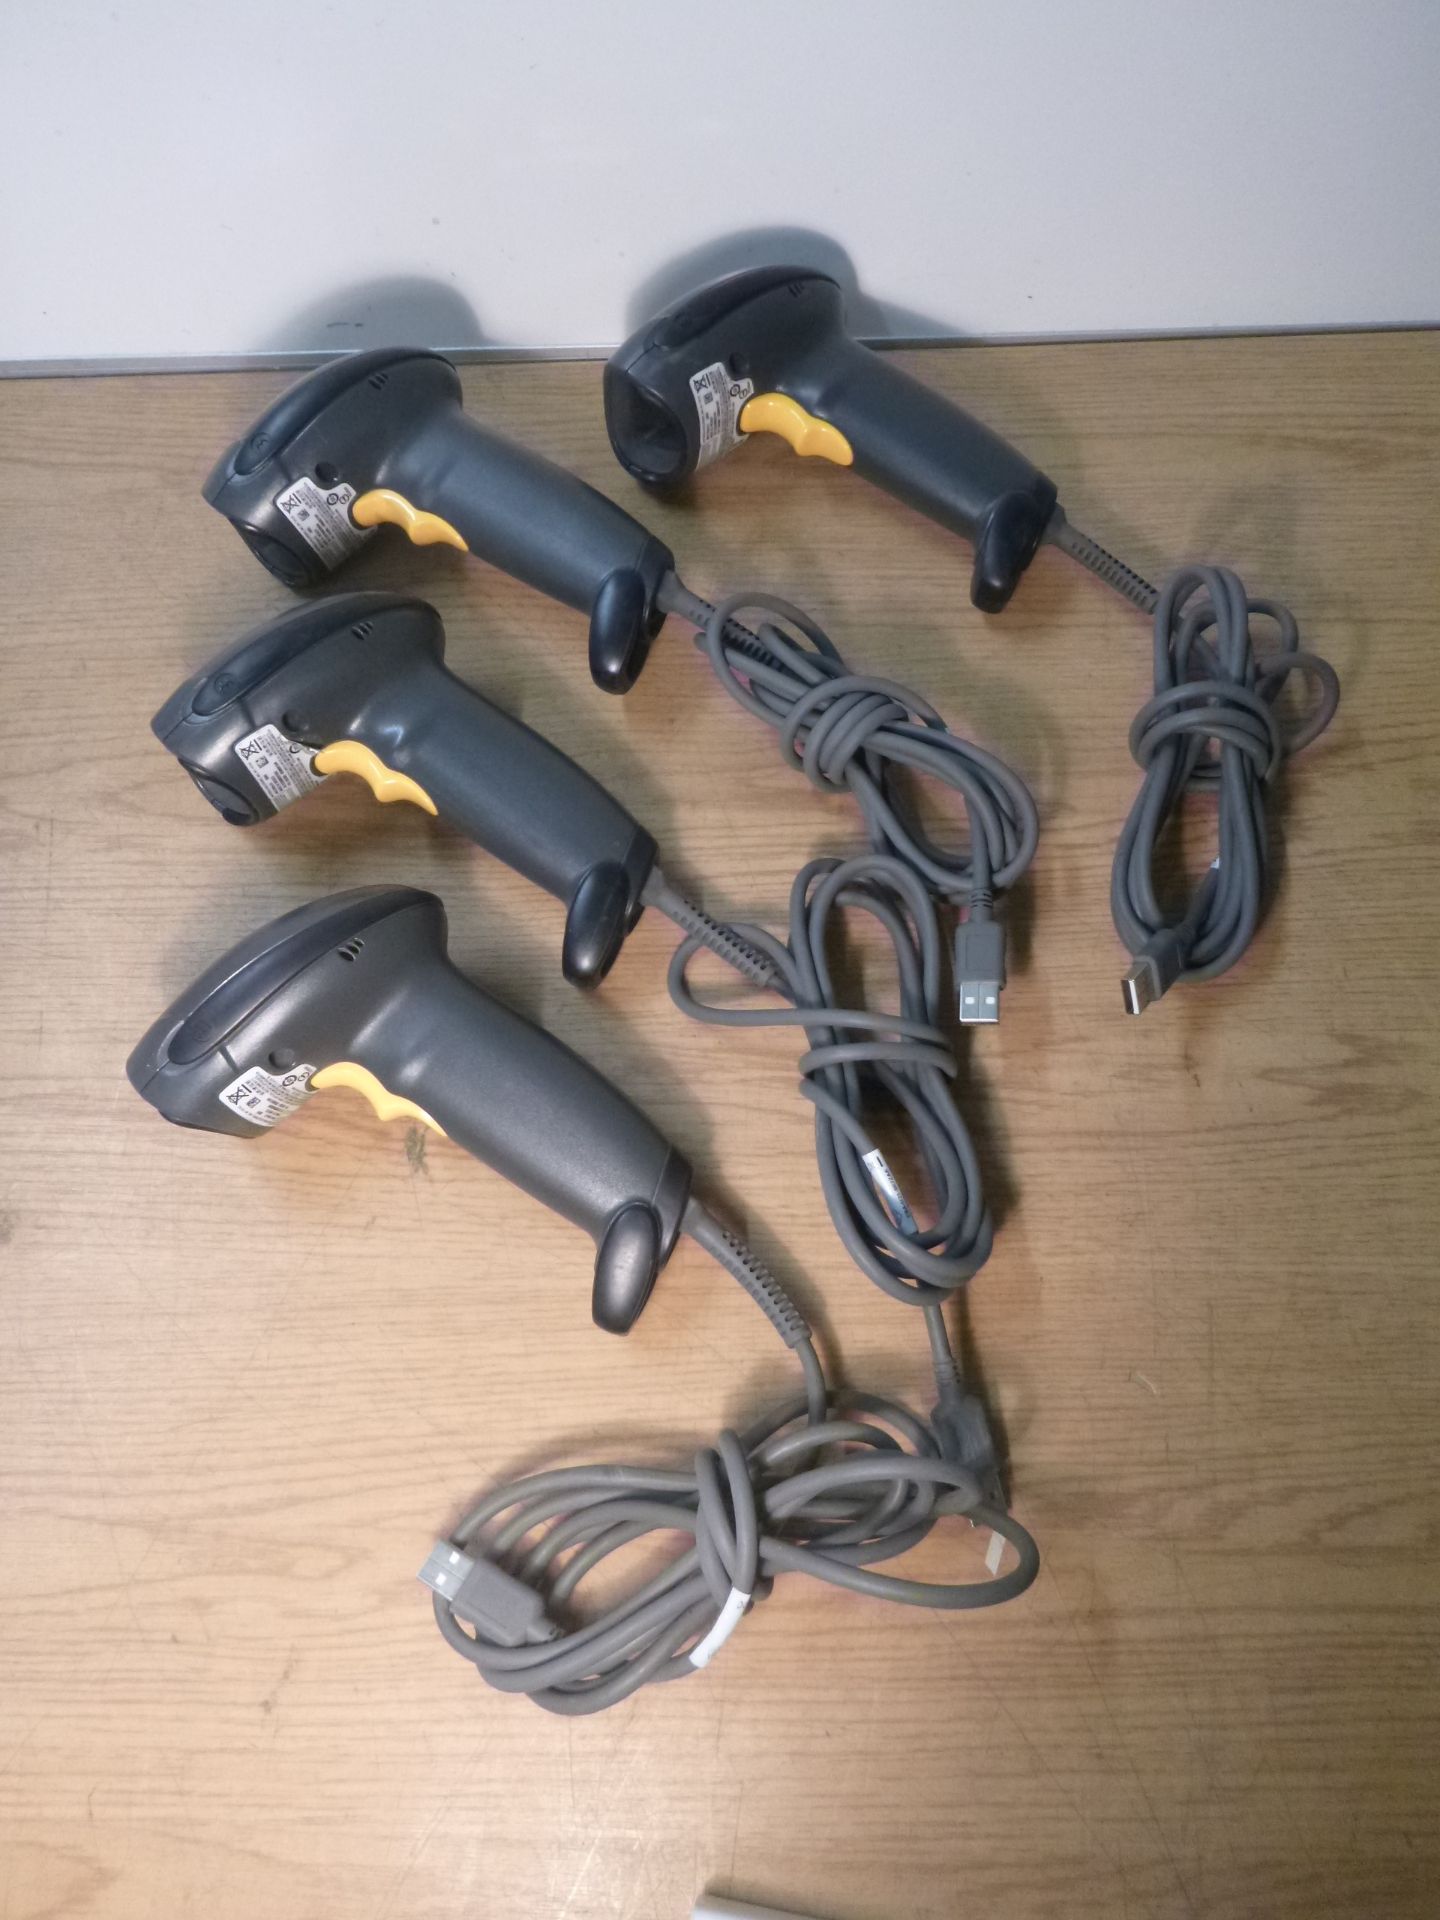 4 X MOTOROLA DS4208 USB HAND HELD BARCODE SCANNERS. TESTED, WORKING.